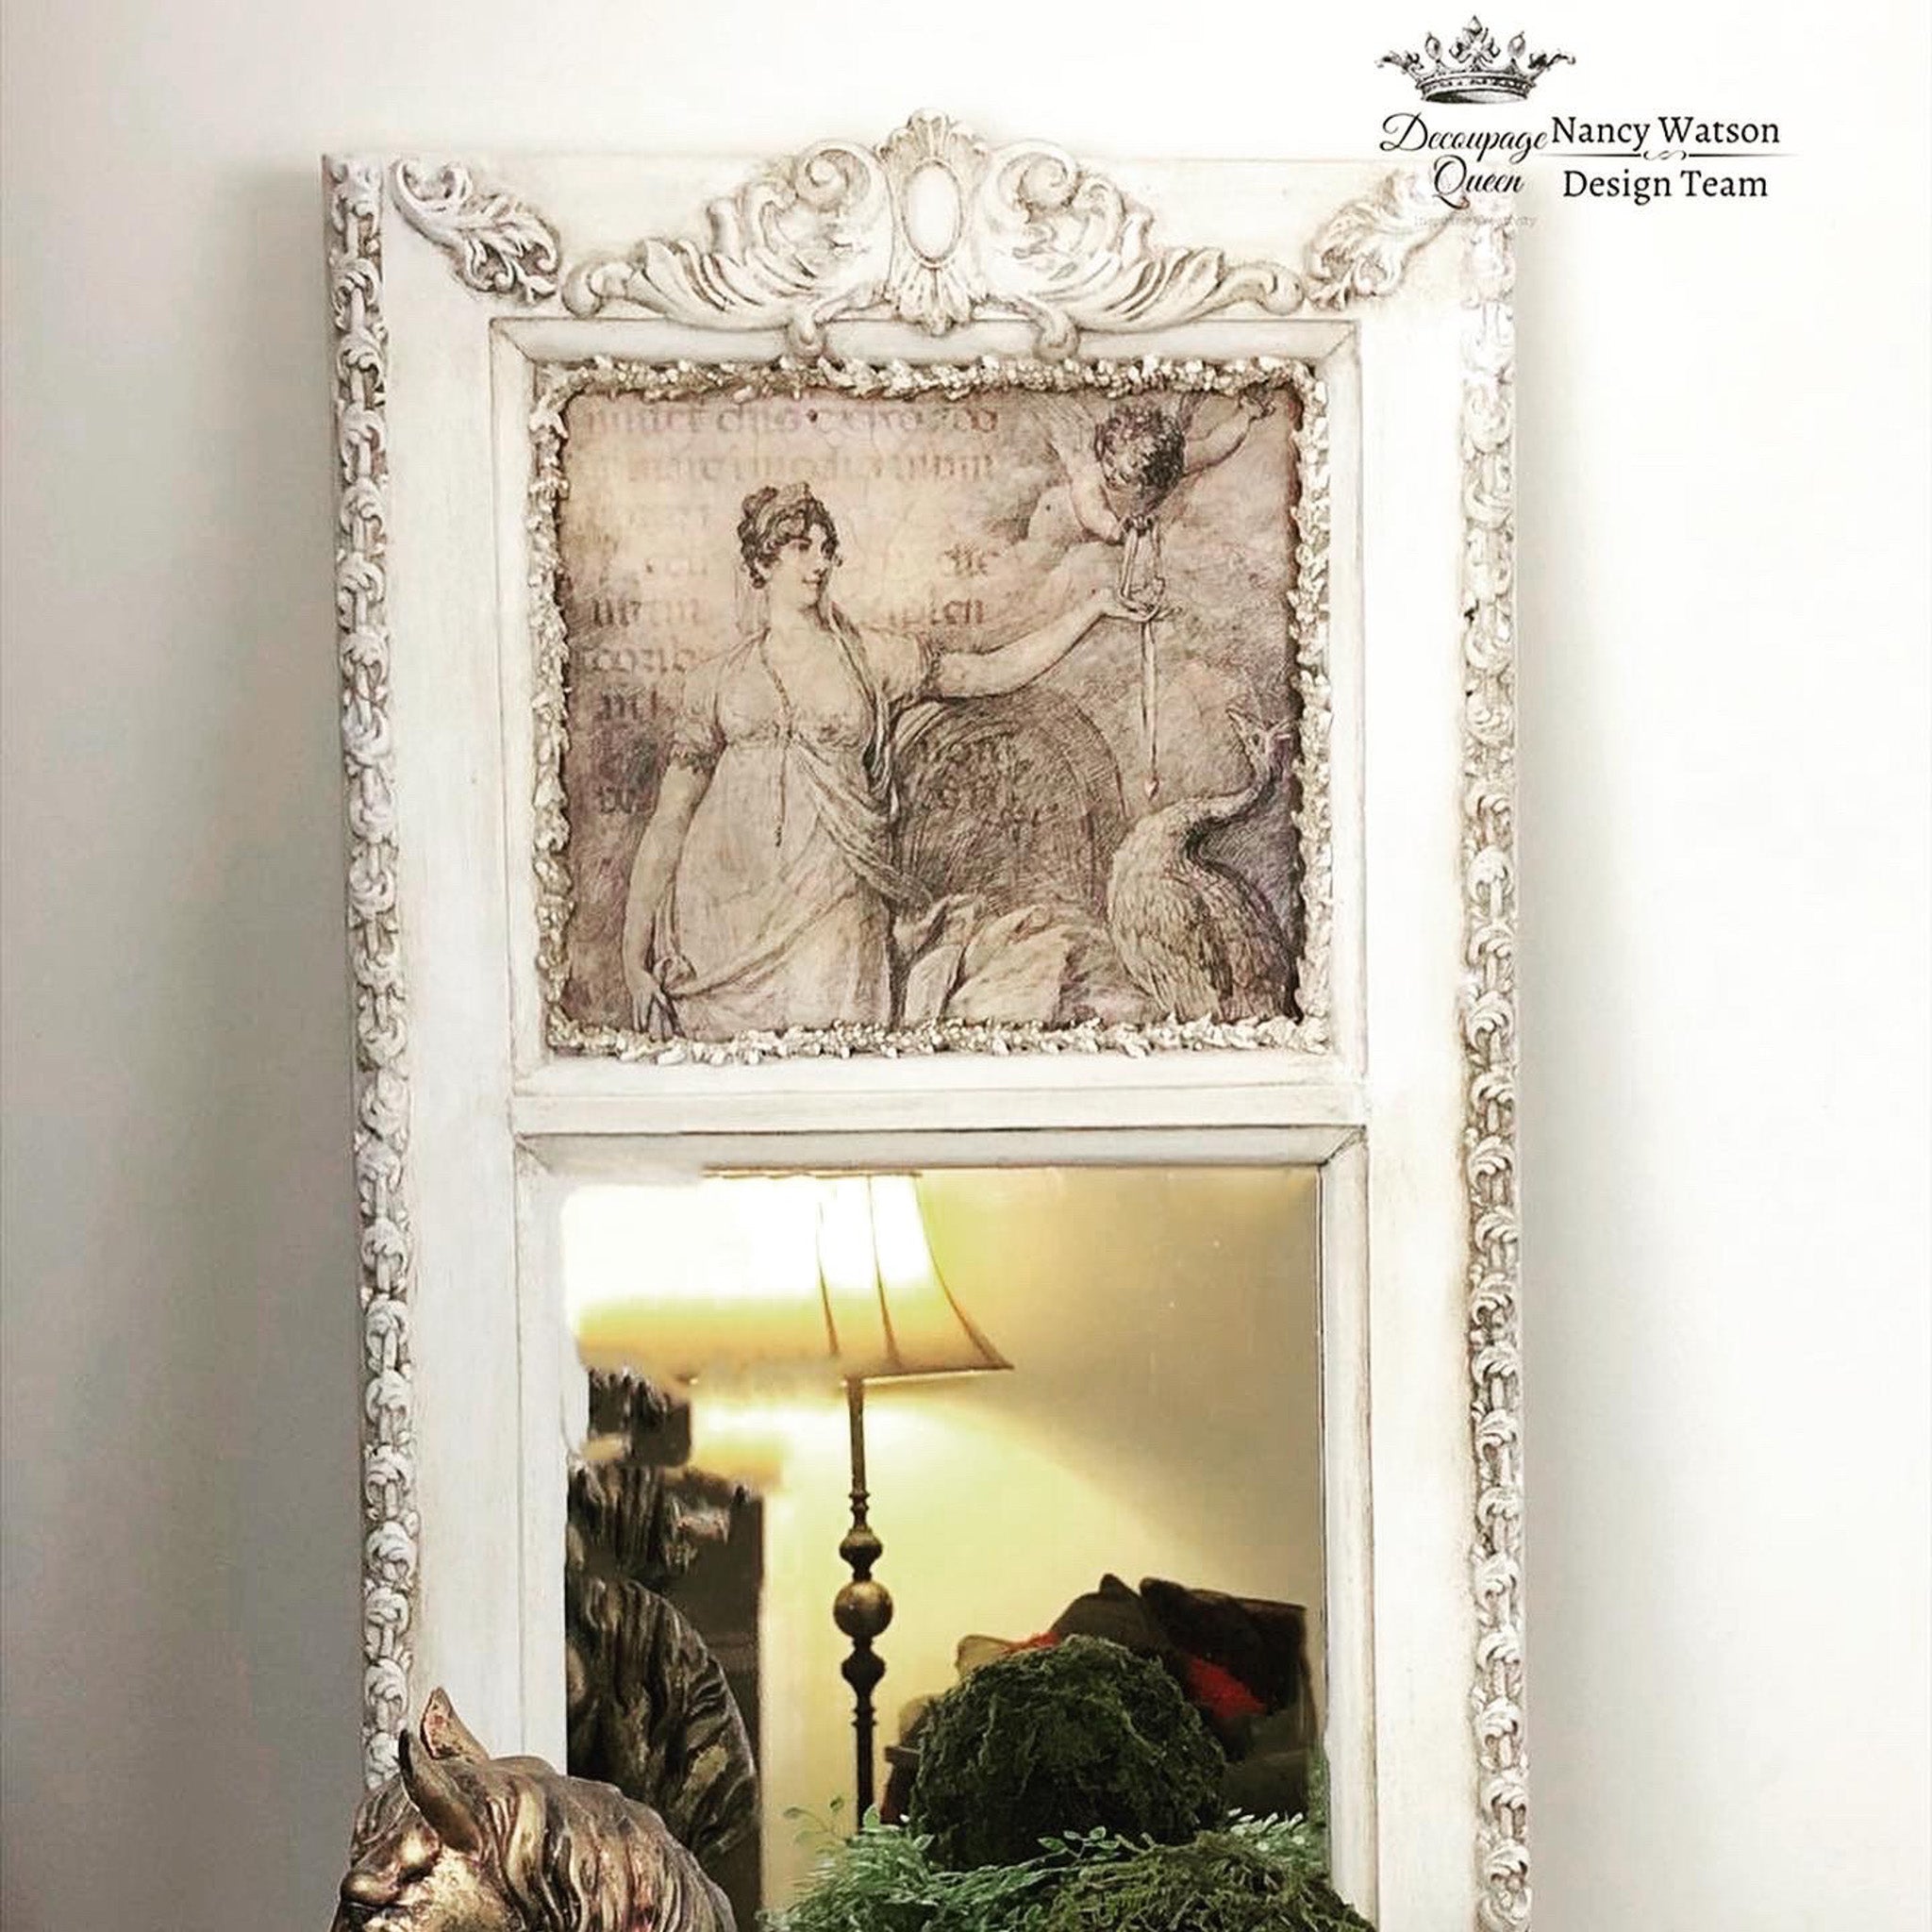 White ornate mirror with the Juno and Cupid decoupage paper on top. A black Decoupage Queen and Nancy Watson Design Team logo on the top right.